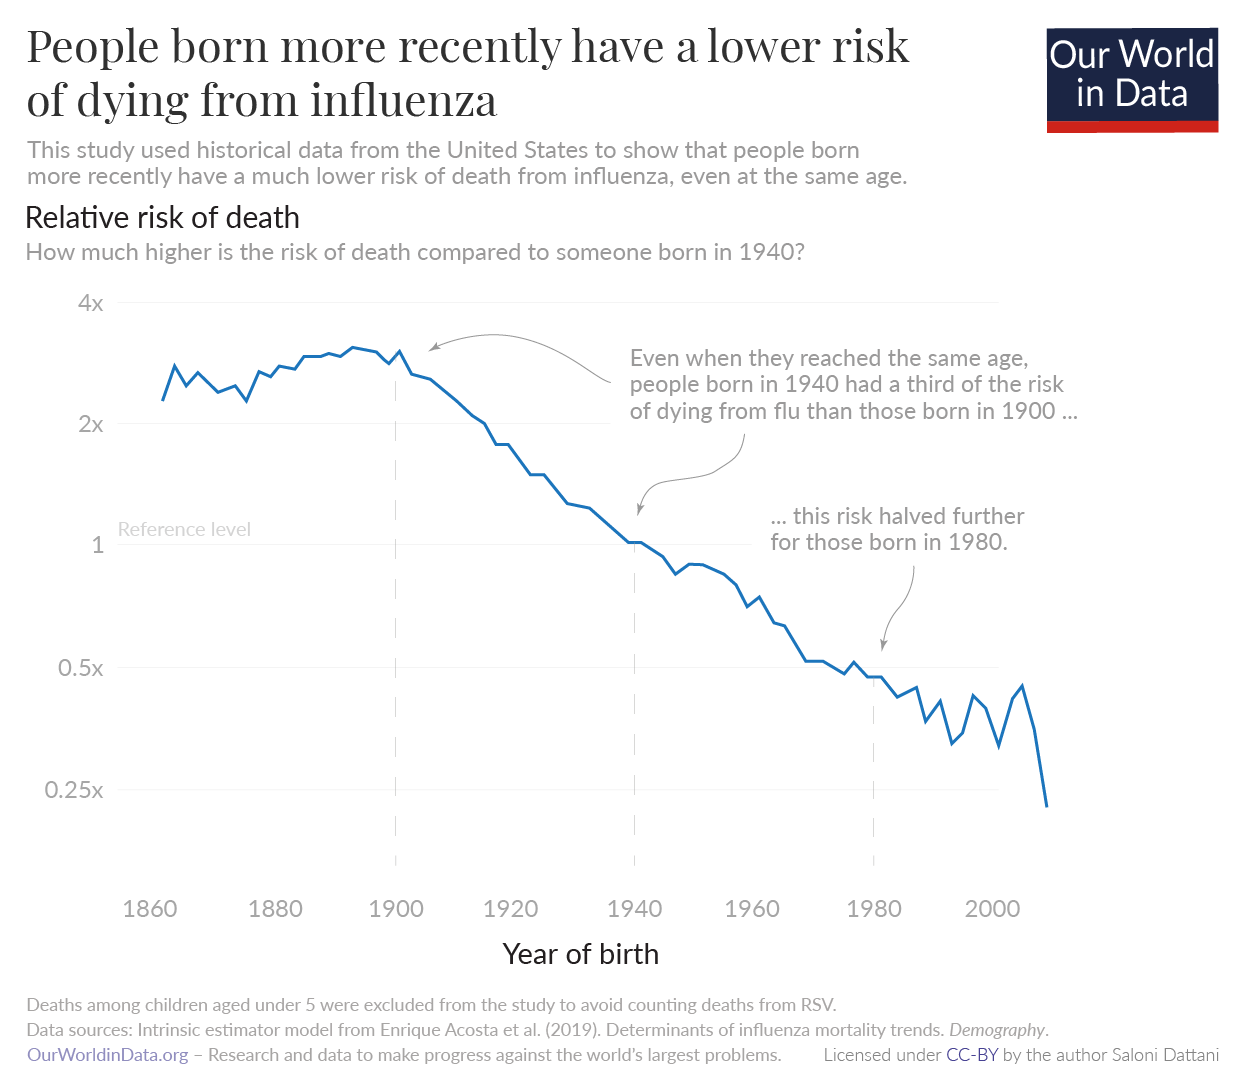 alt: People born more recently have a lower risk of dying from influenza. Even when they reached the same age, people born in 1940 had a third of the risk of dying from flu than those born in 1900. This risk halved further for those born in 1980.